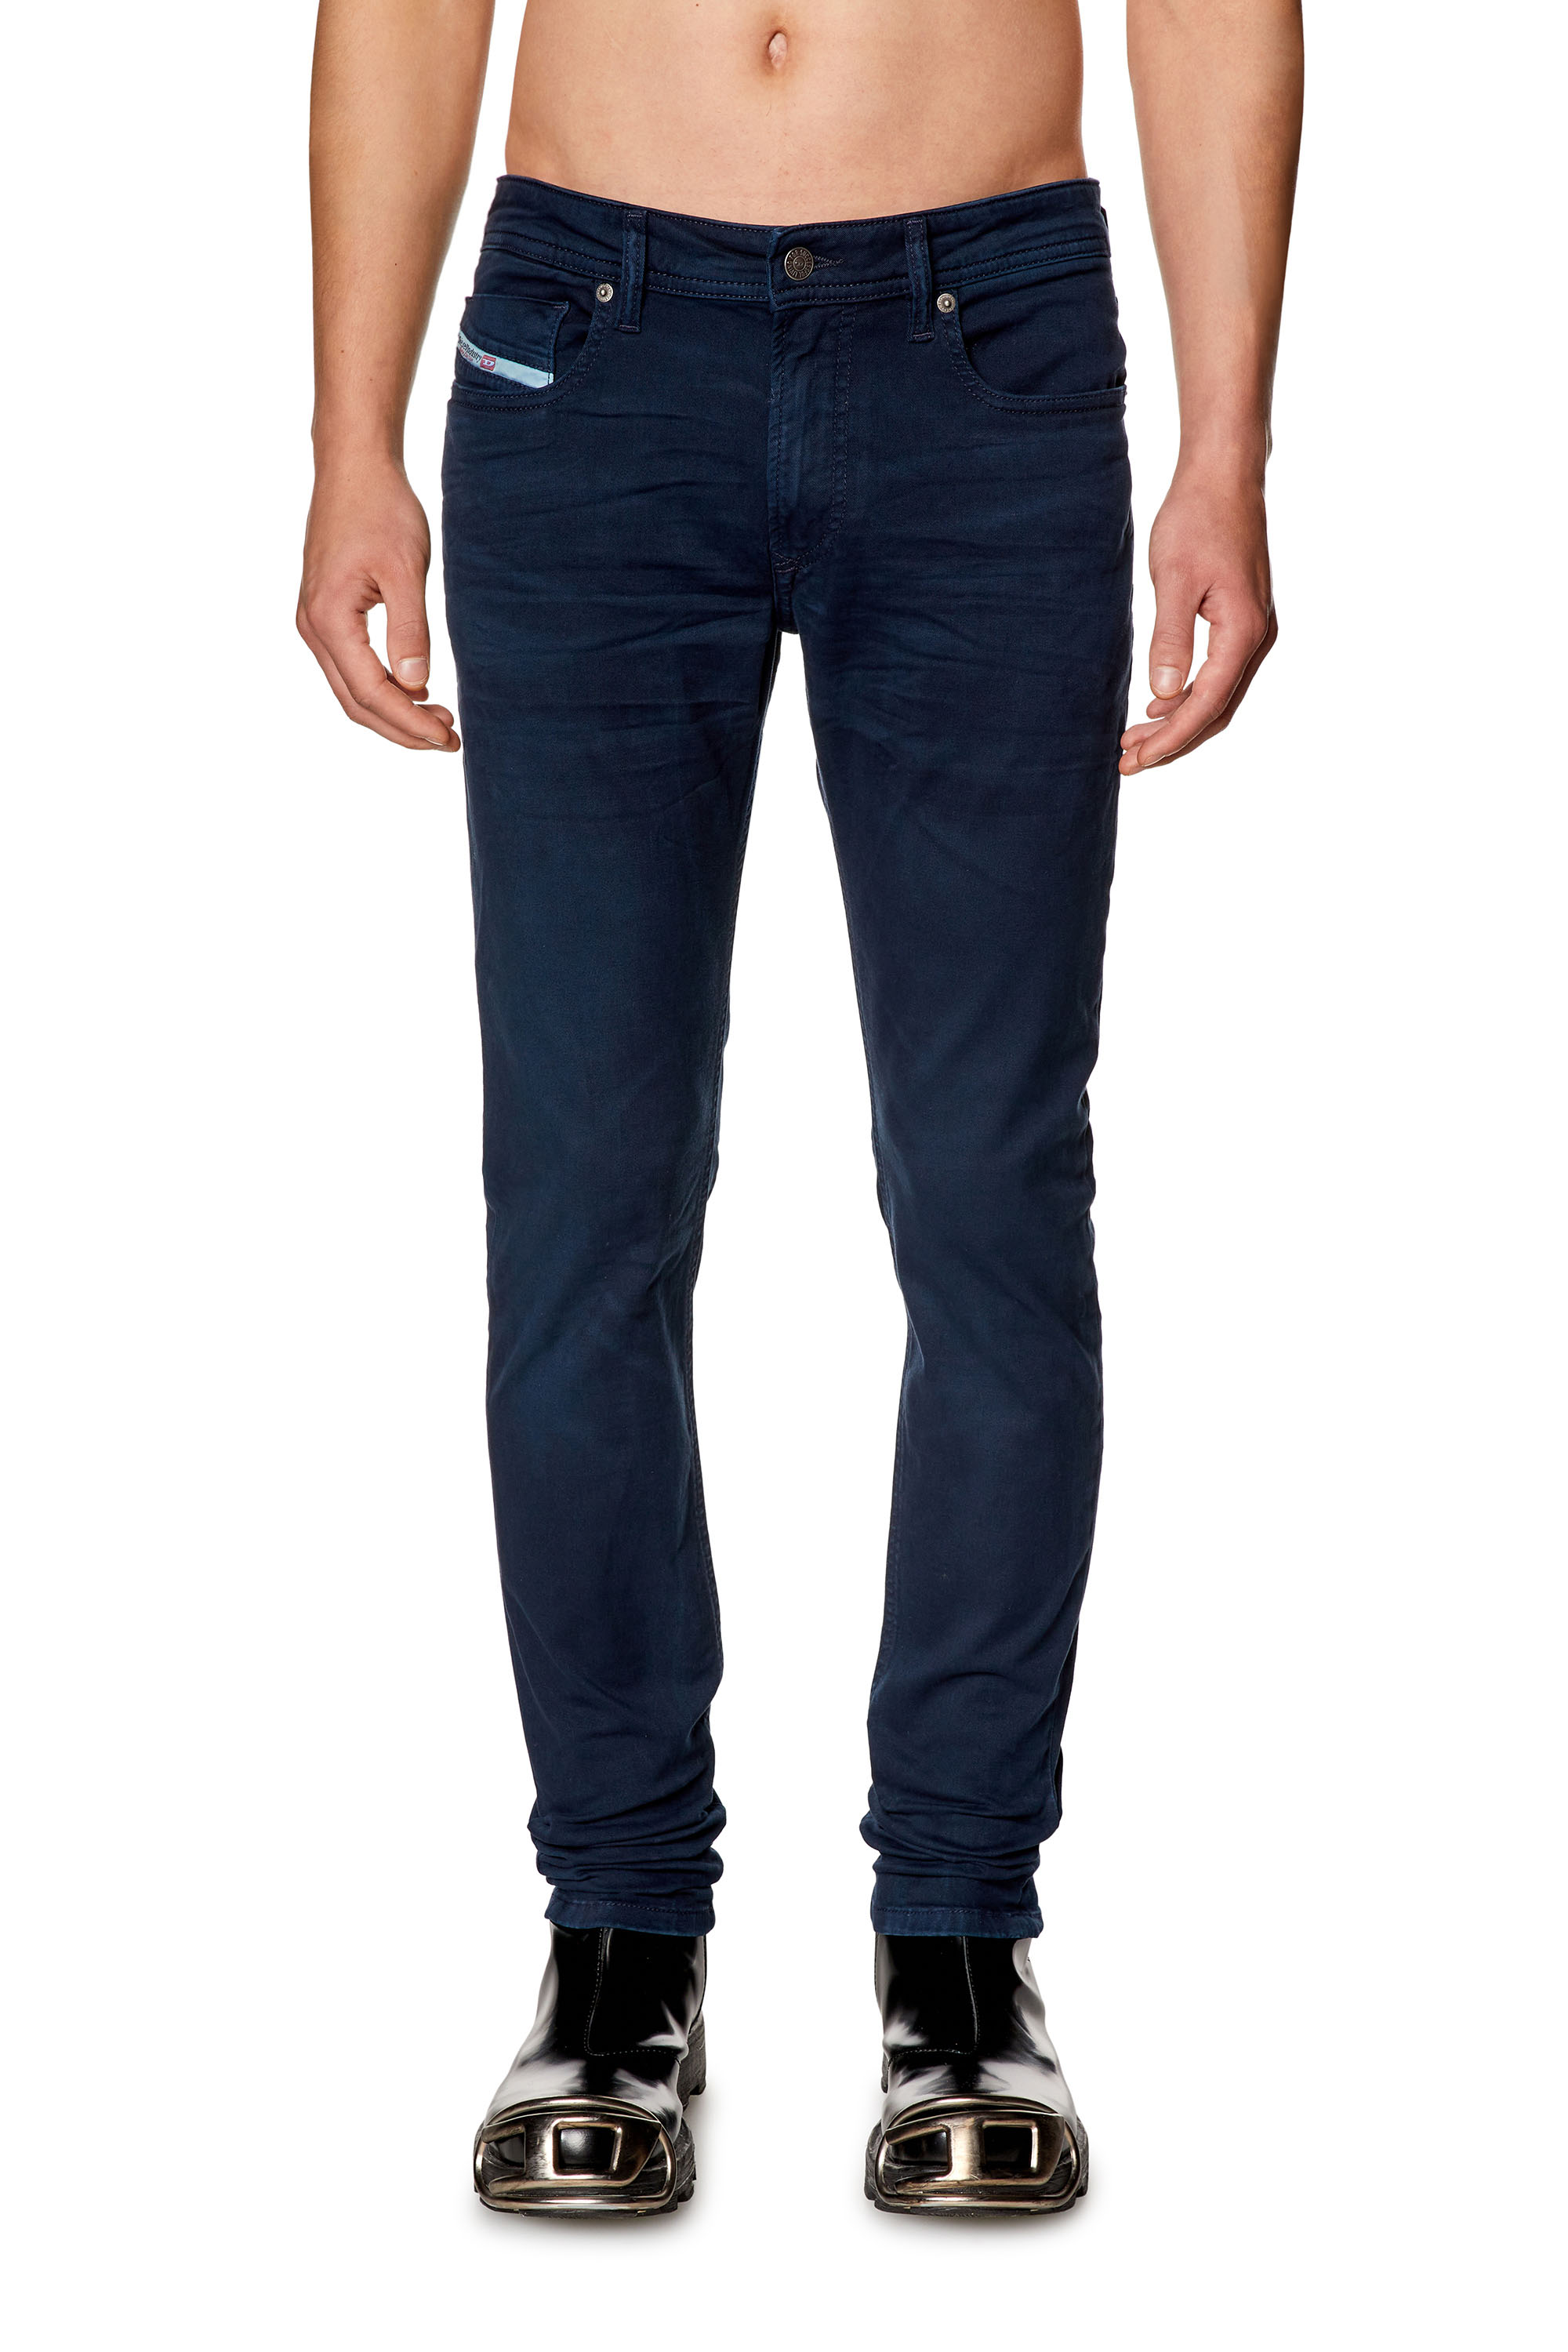 Men's Skinny Jeans: close-fitting, tight, low waist